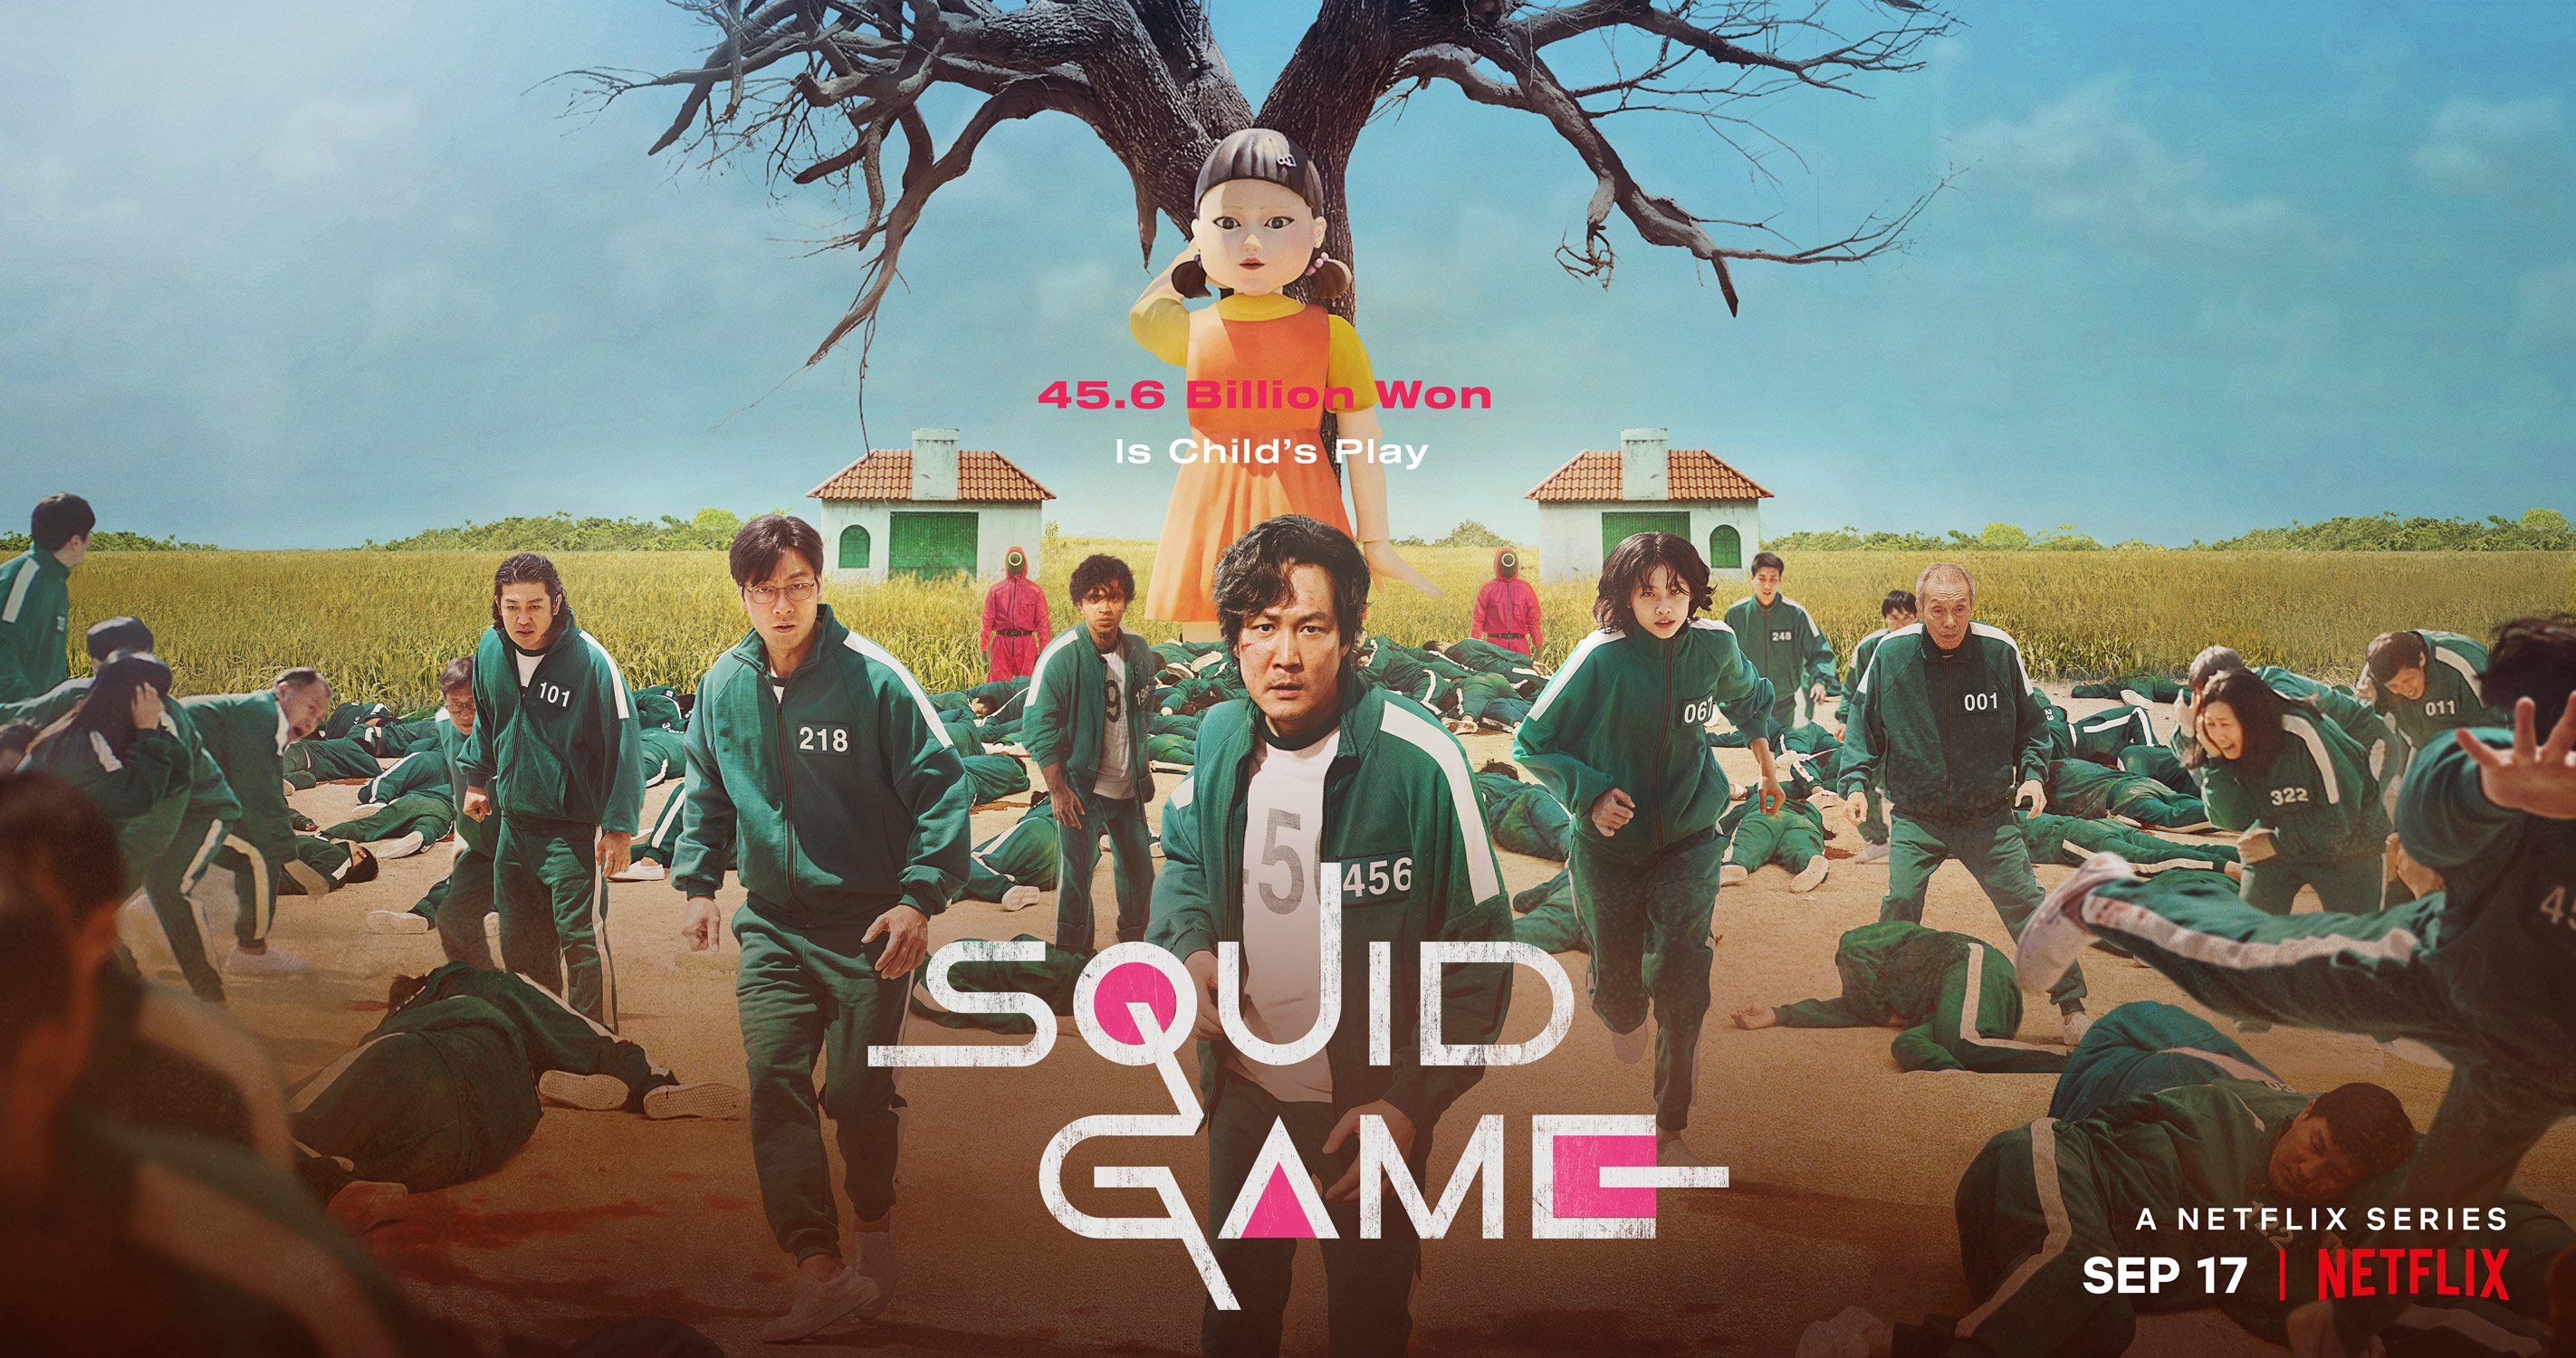 Netflix 'Squid Game' poster with players in green track suits in front of giant robotic doll.